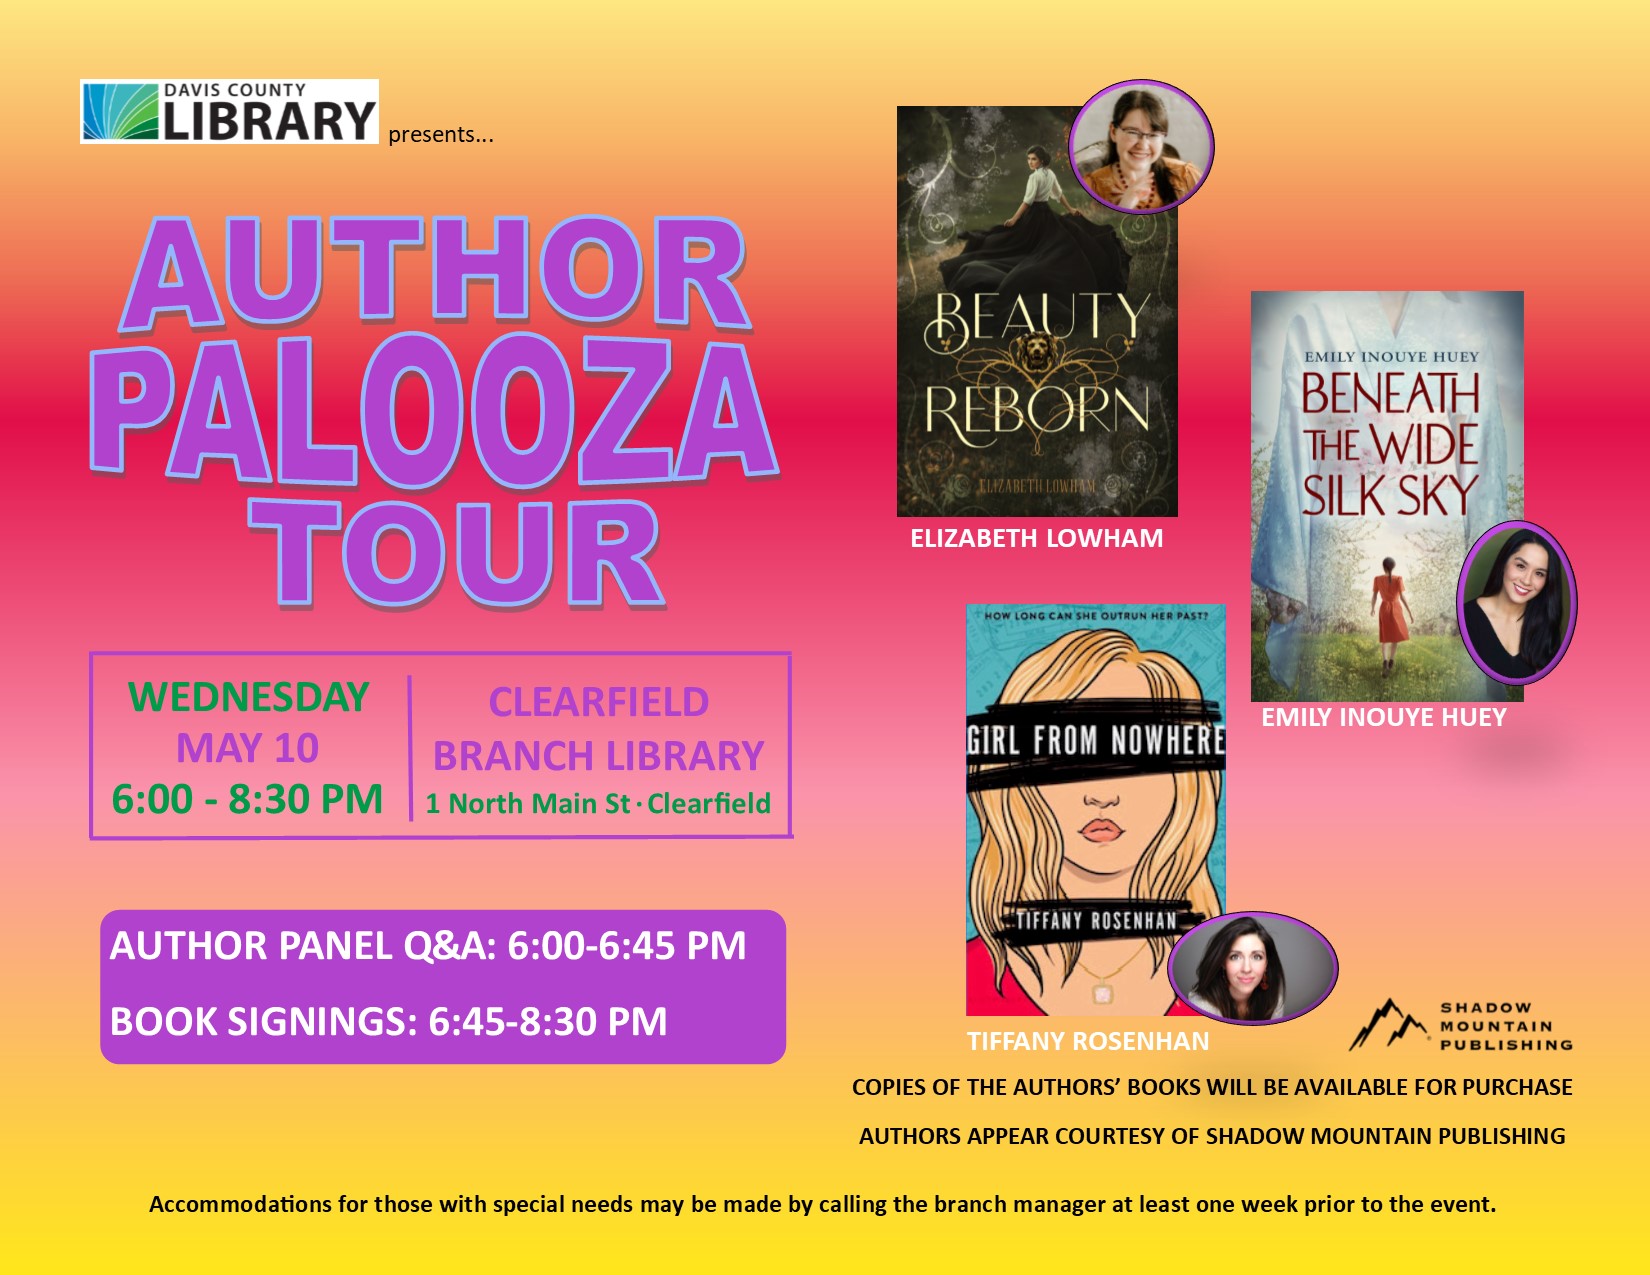 Authors Elizabeth Lowham, Emily Inouye Huey, and Tiffany Rosenhan will be joining us for an Q&A panel and book signing.  Deseret Book will be on hand with titles by the authors for purchase.  Wednesday, May 10, 2023 @ 6:00 pm at the Clearfield Branch. 